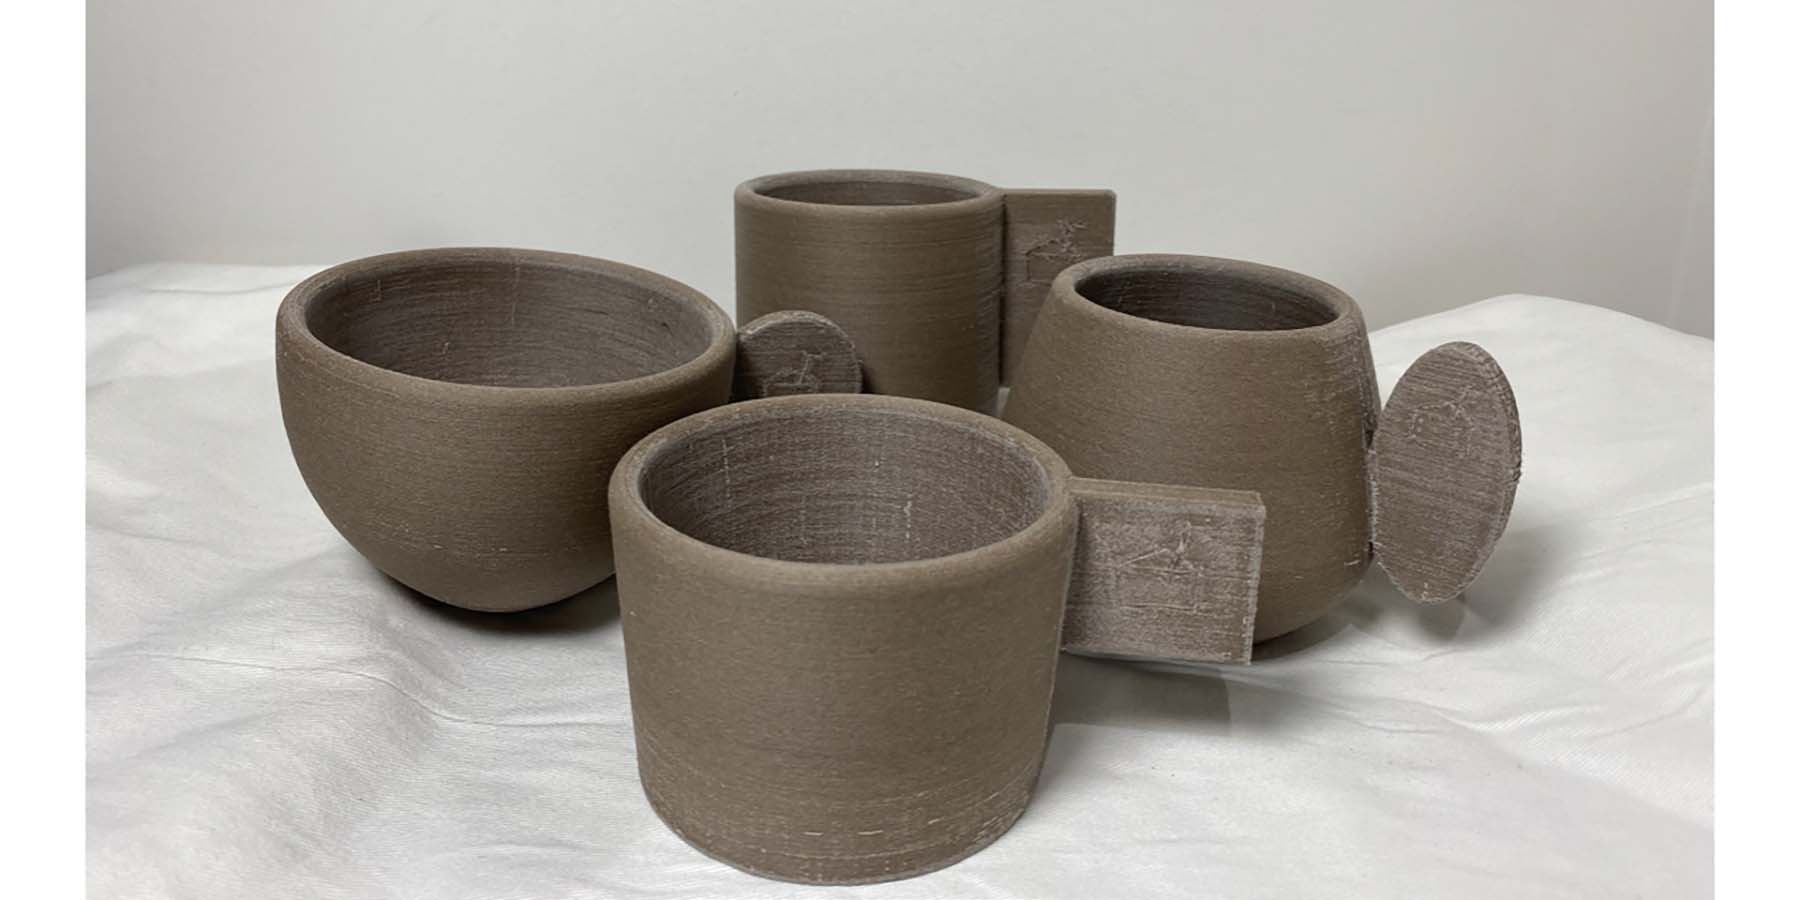 This is the series of designed cups printed by real coconut filament